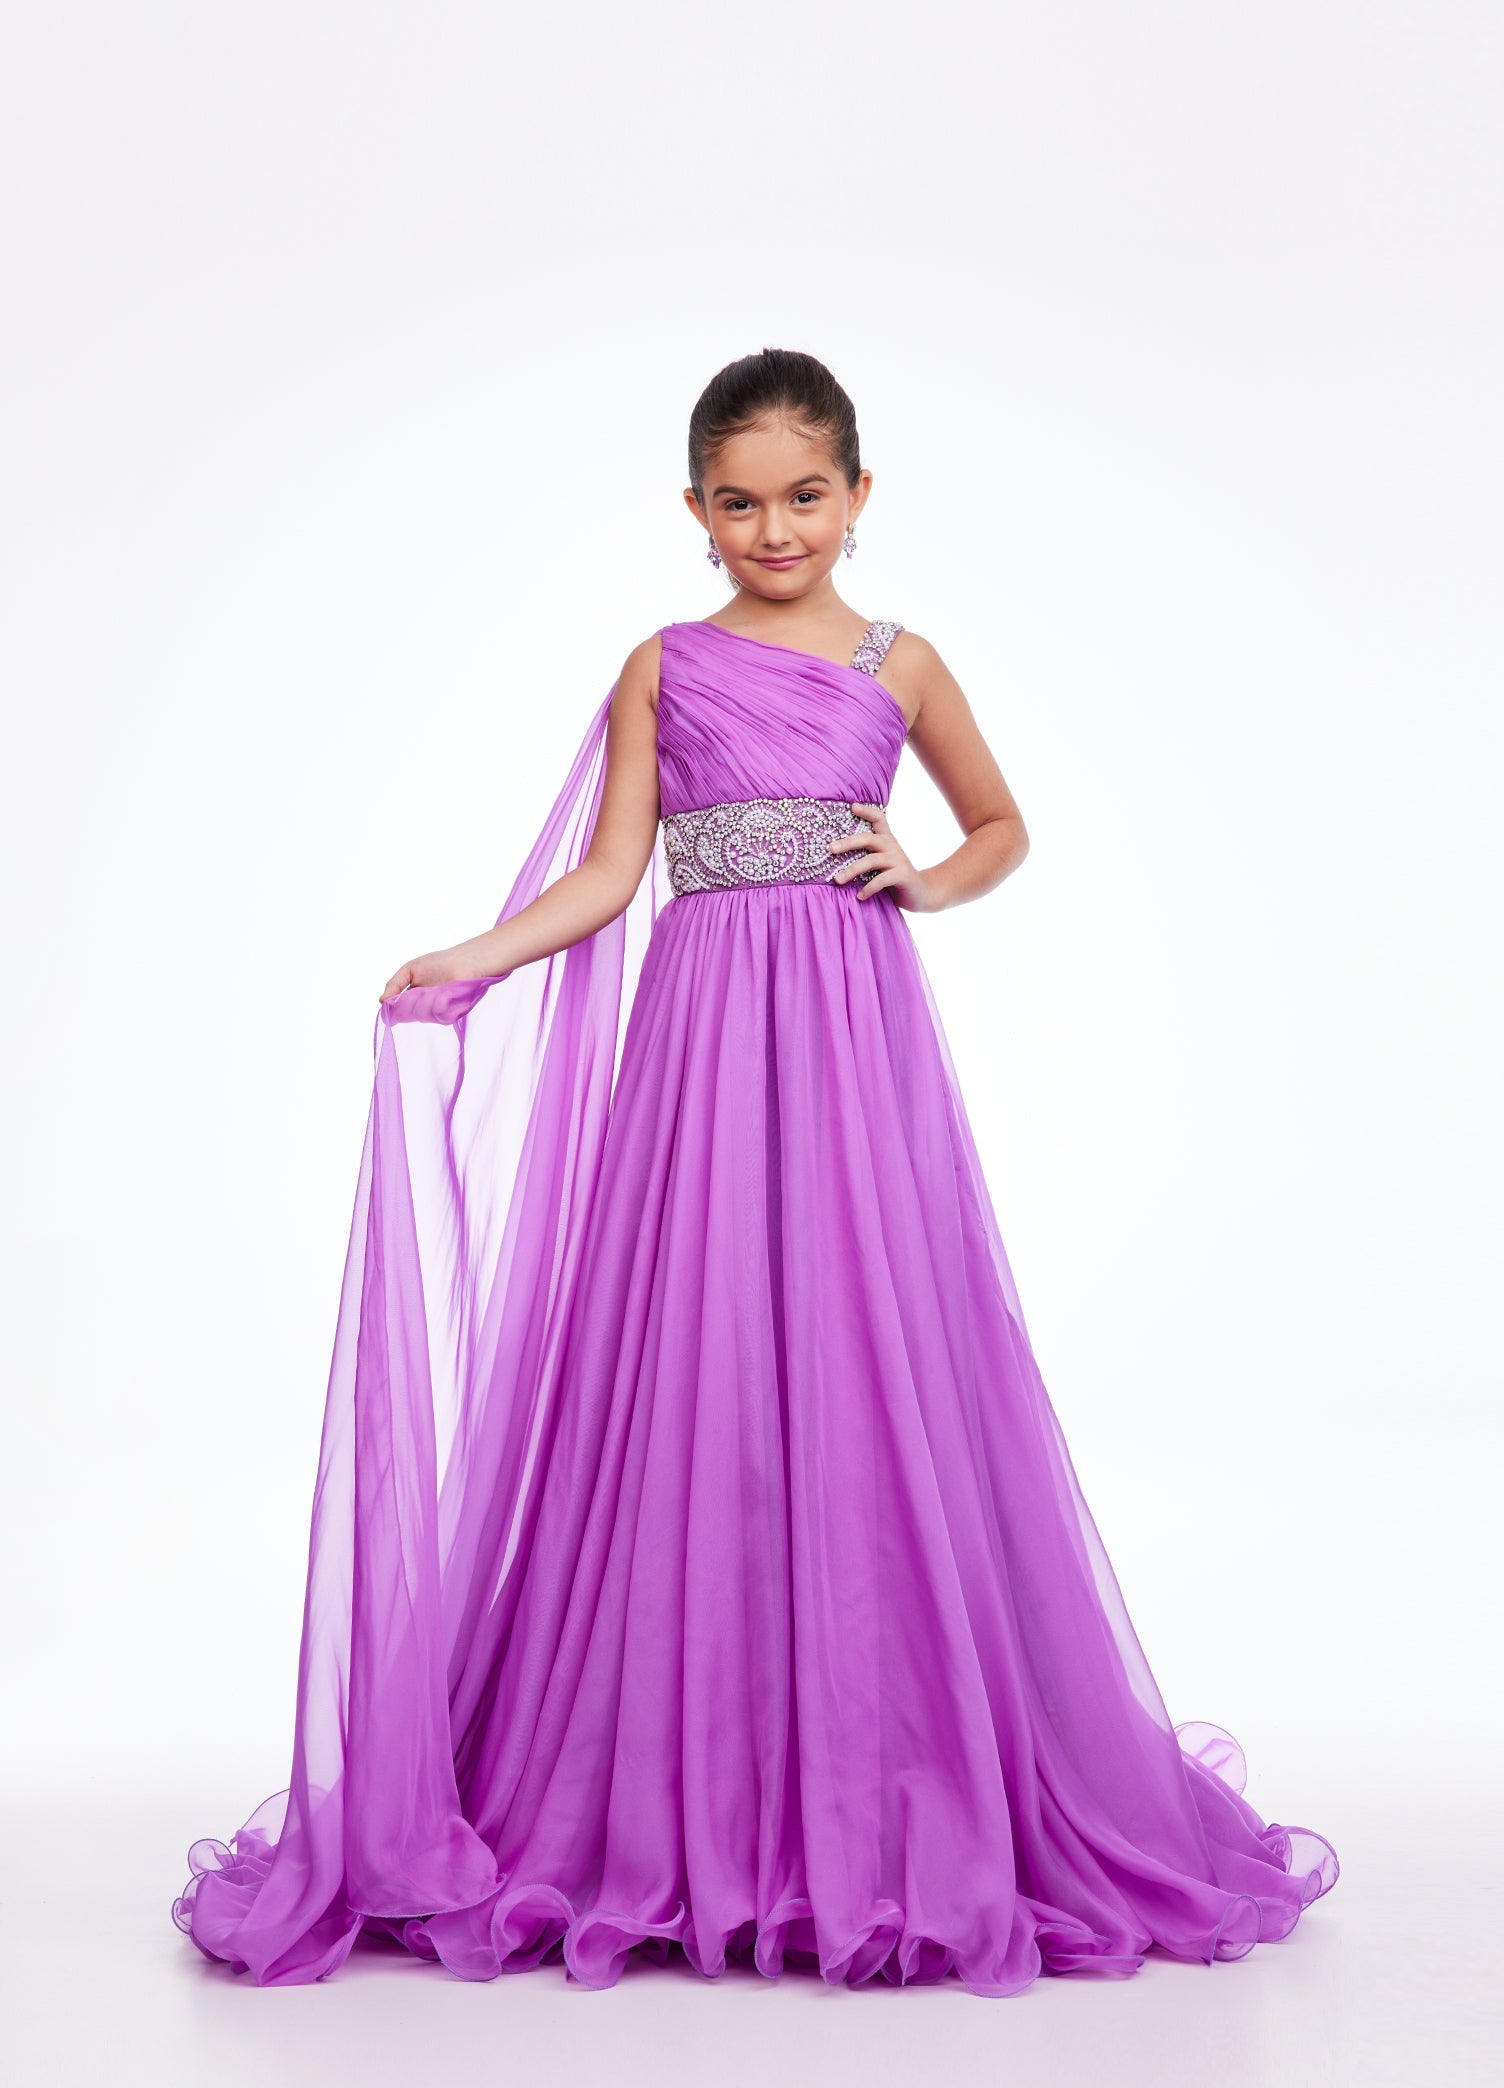 Ashley Lauren Kids 8122  Girls and Preteens Pageant Dress.  This Grecian inspired one shoulder chiffon gown features an ornately beaded waist giving way to an A-Line chiffon skirt. The look is complete with an attached shoulder chiffon cape.  Available colors:  Orchid, Aqua, Ivory